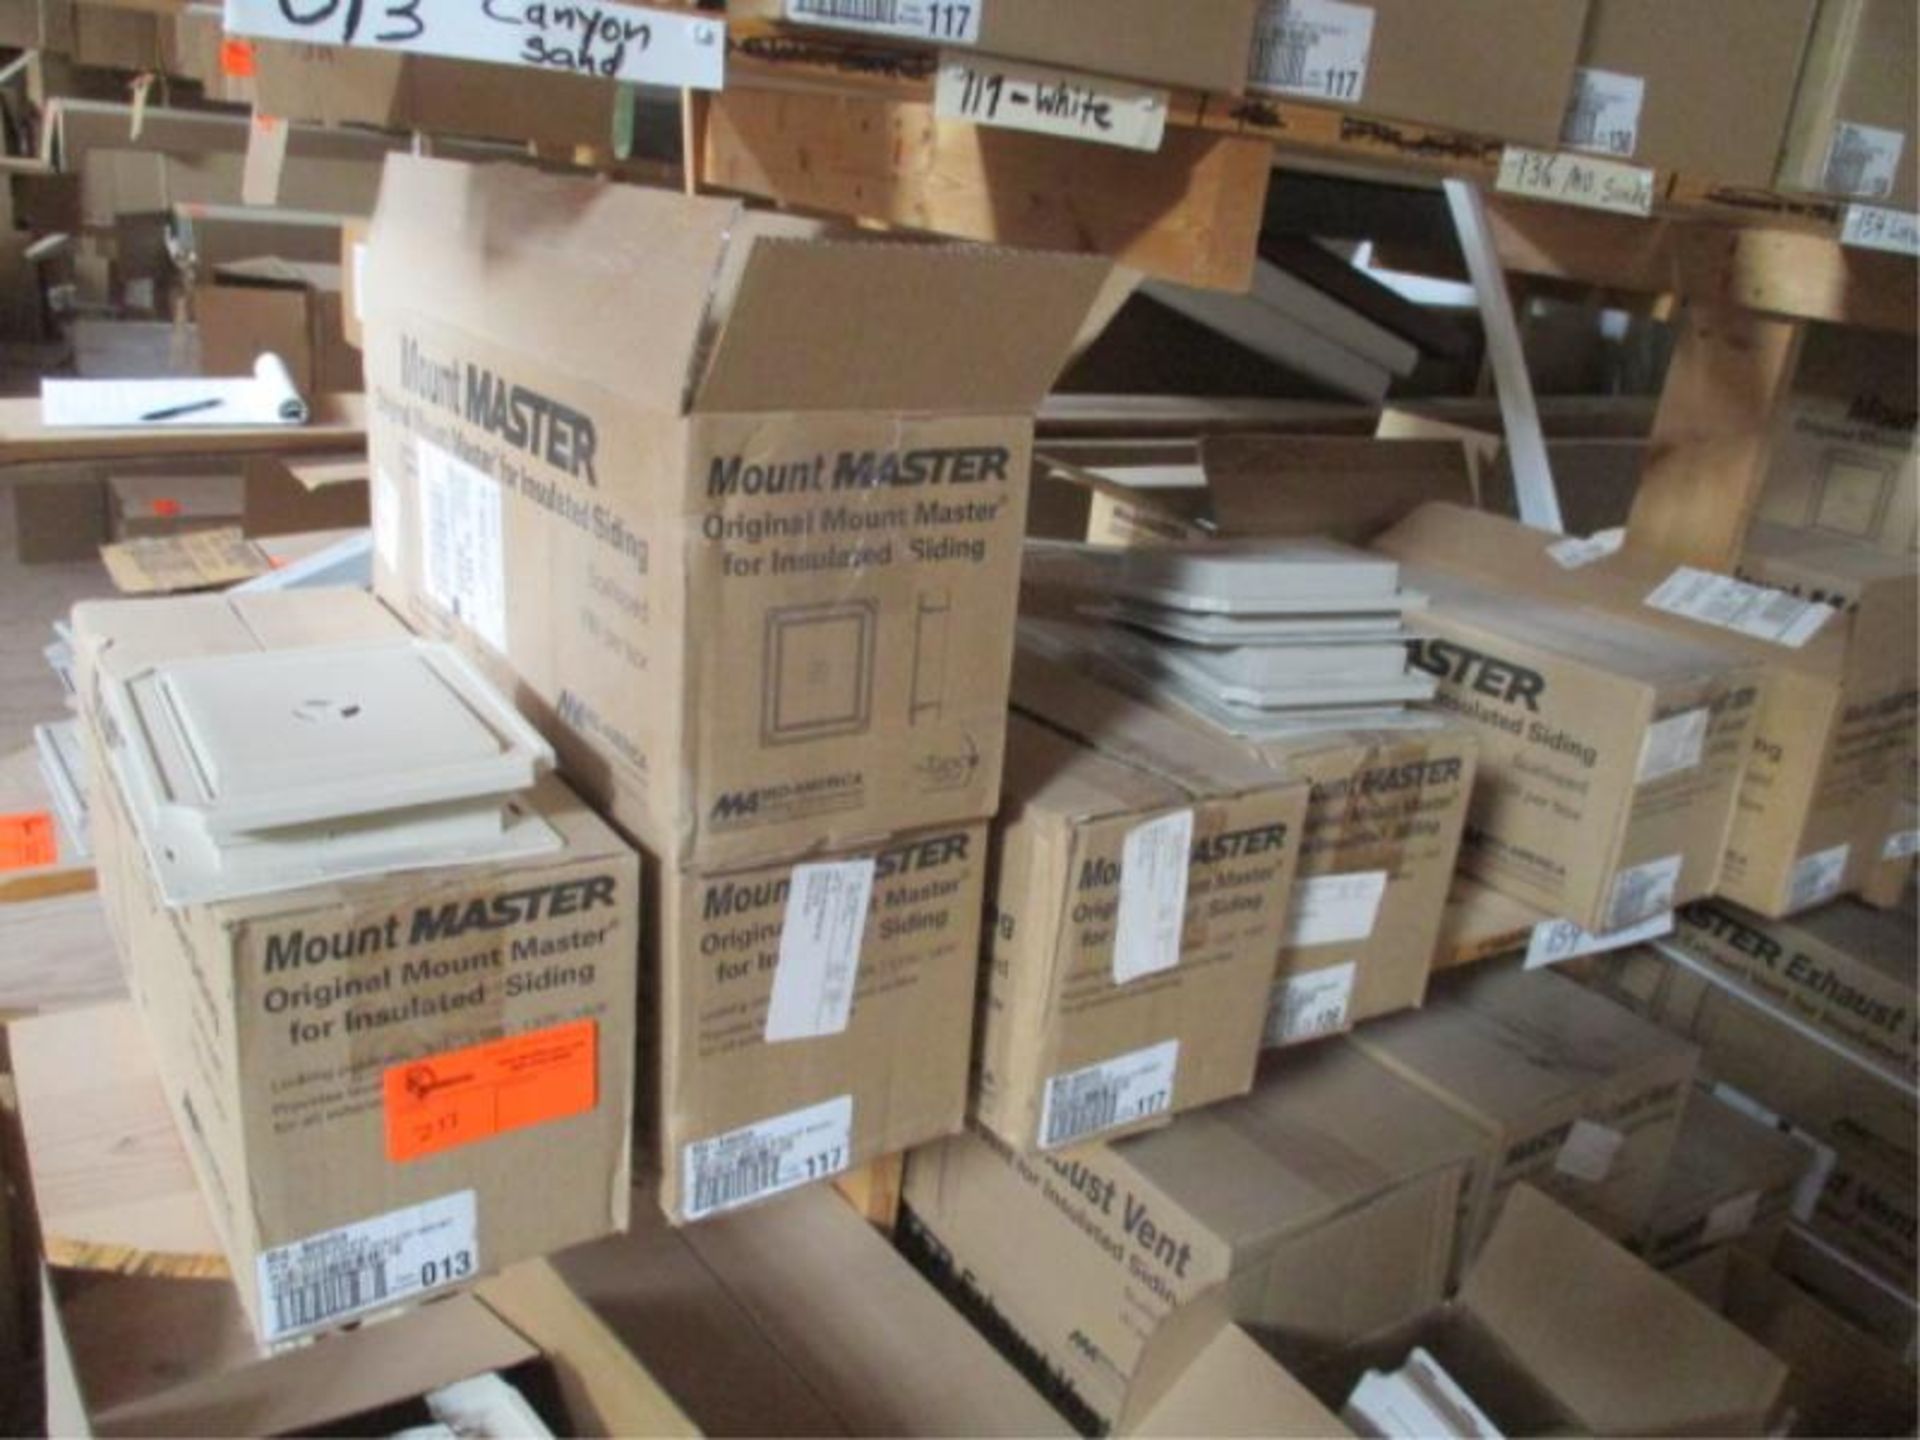 Mount master for insulated Siding (Scalloped) 16 Boxes